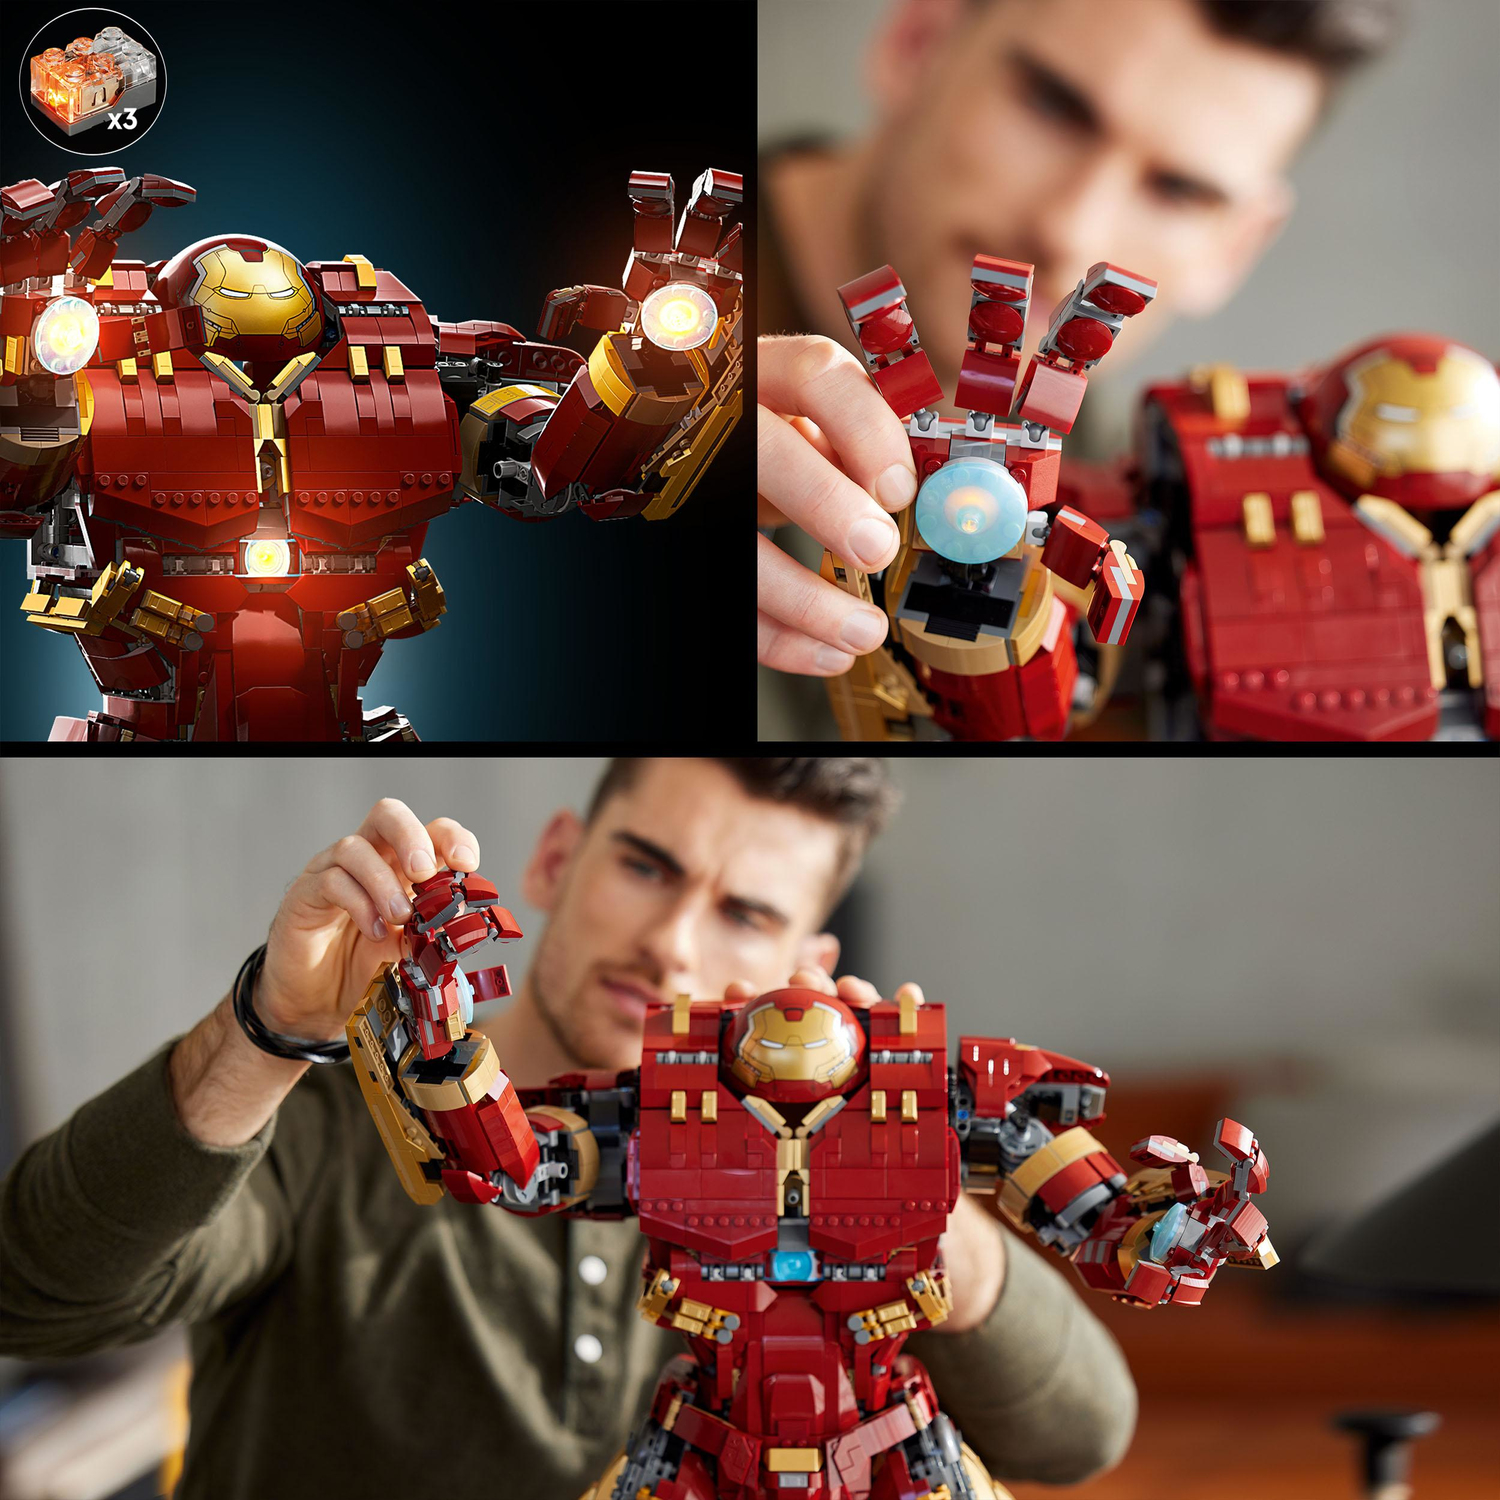 Suit up with this incredible Lego Marvel Hulkbuster set